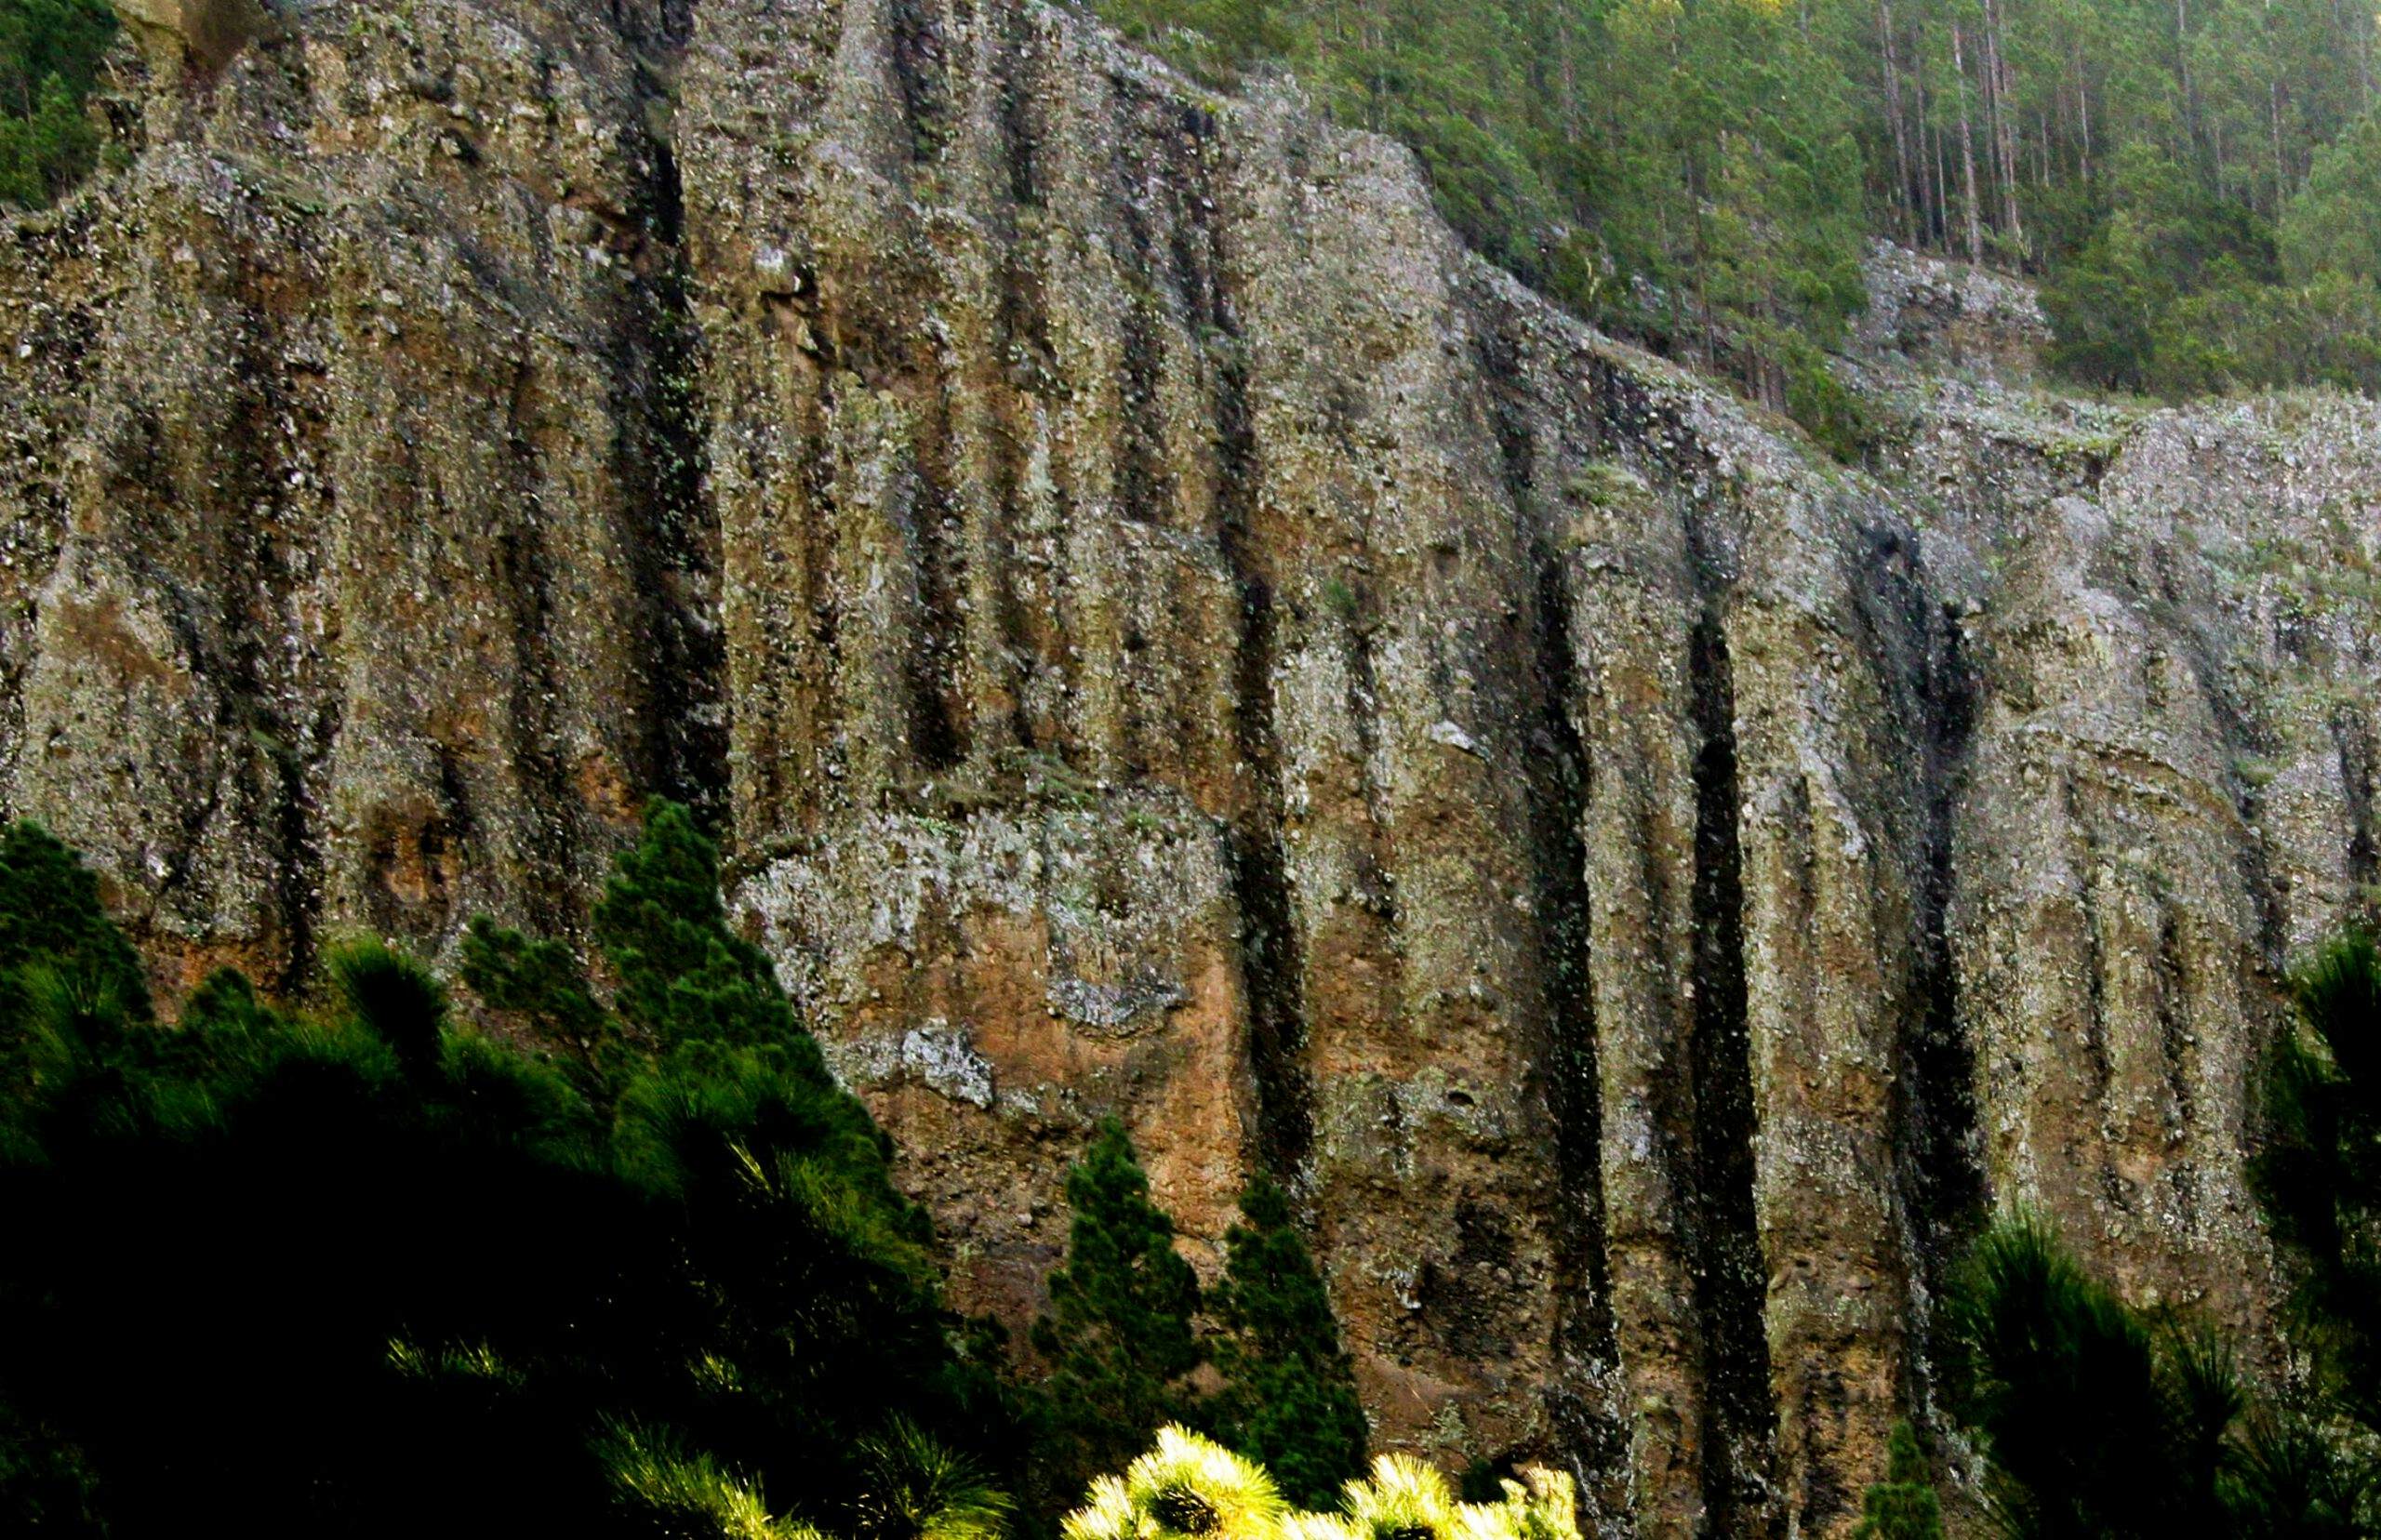 the organ pipes after which the Organos high trail is named